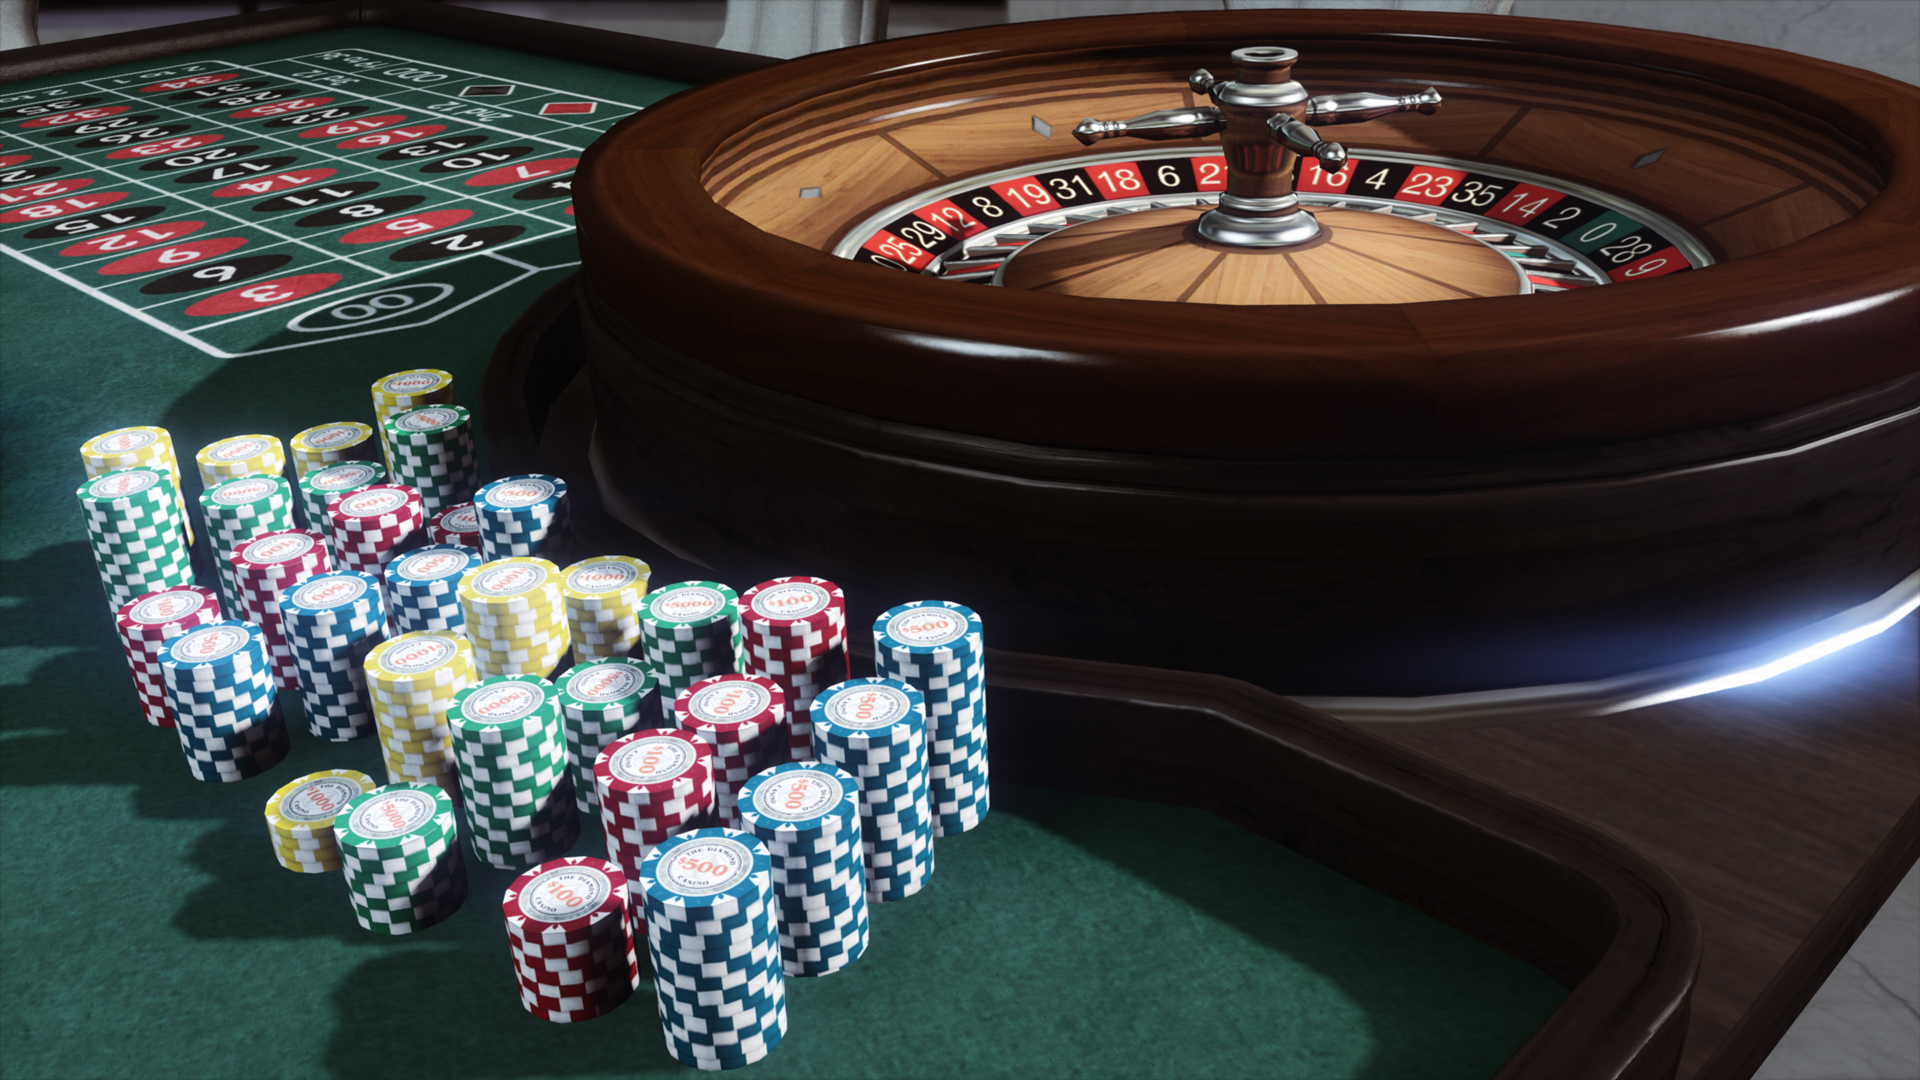 Understand More About Play Blackjack Games